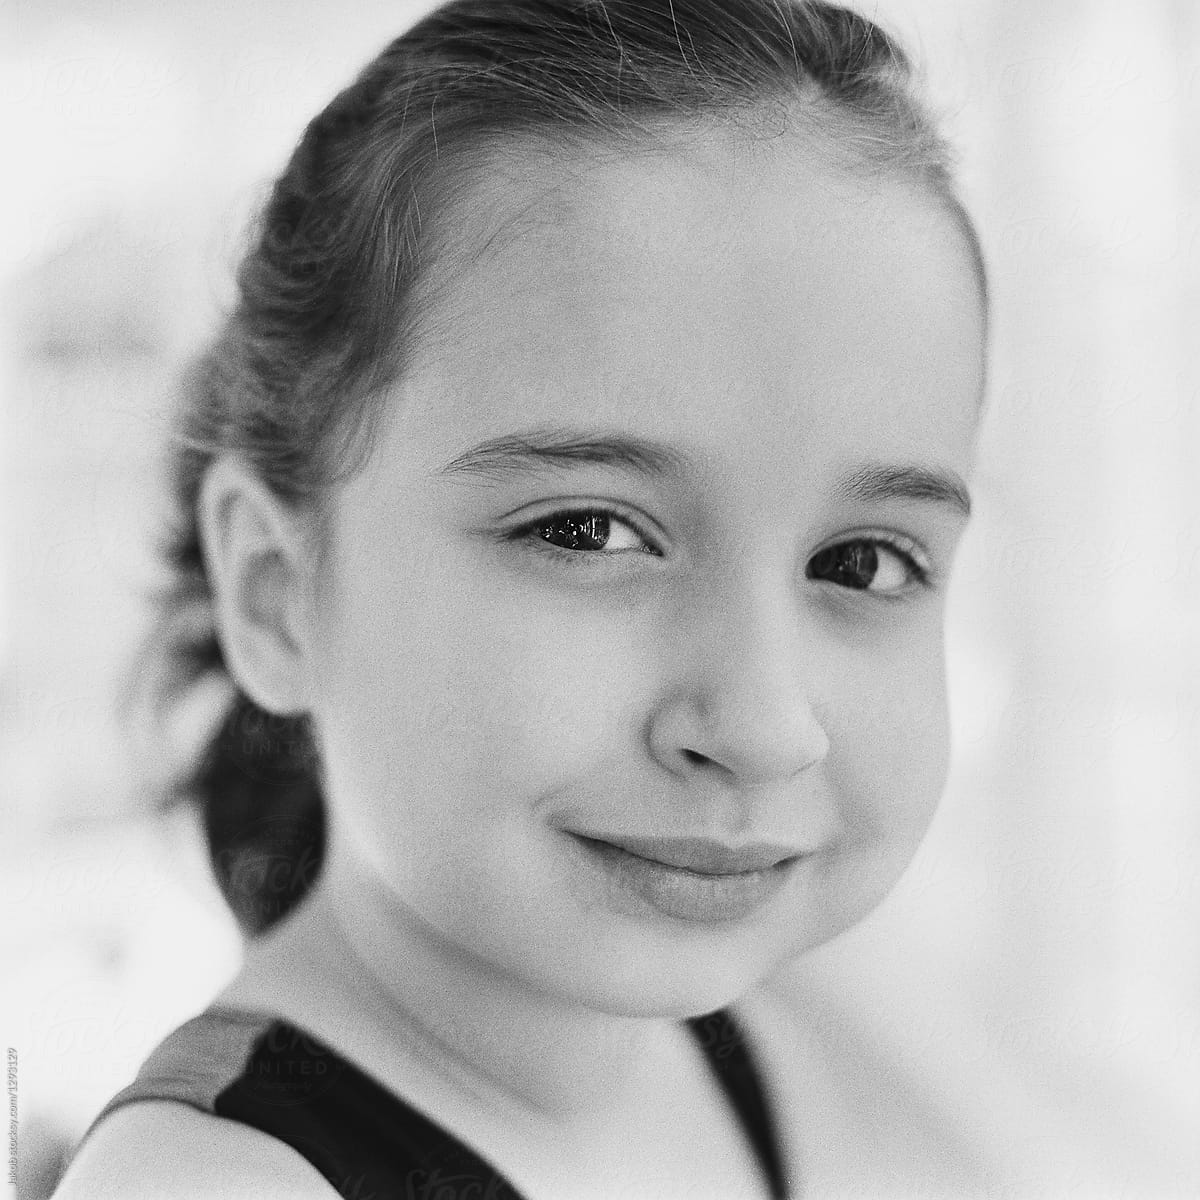 Black And White Close Up Portrait Of A Beautiful Young Girl By